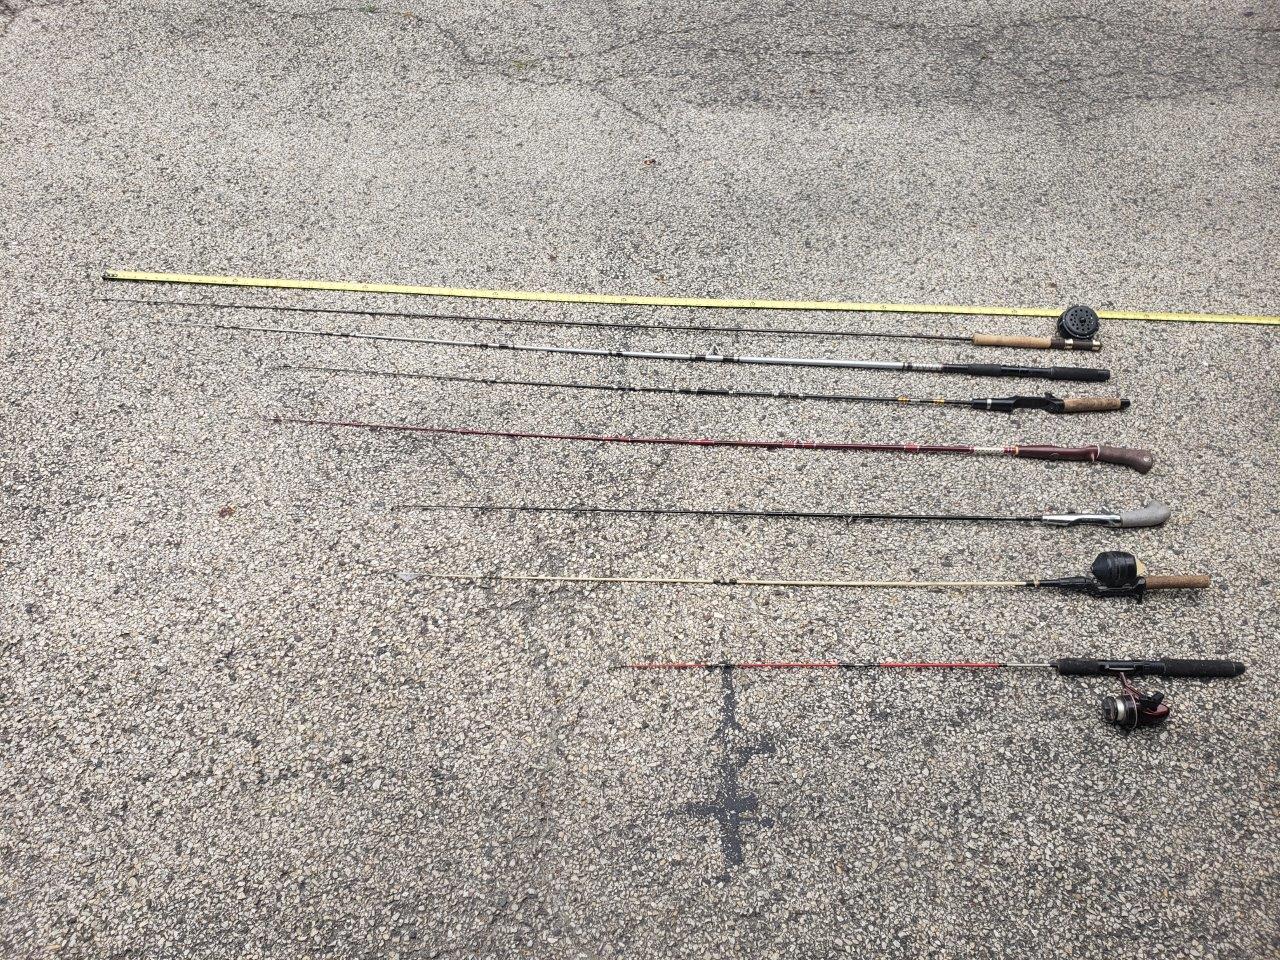 13 fishing rods, 5 with reels long poles